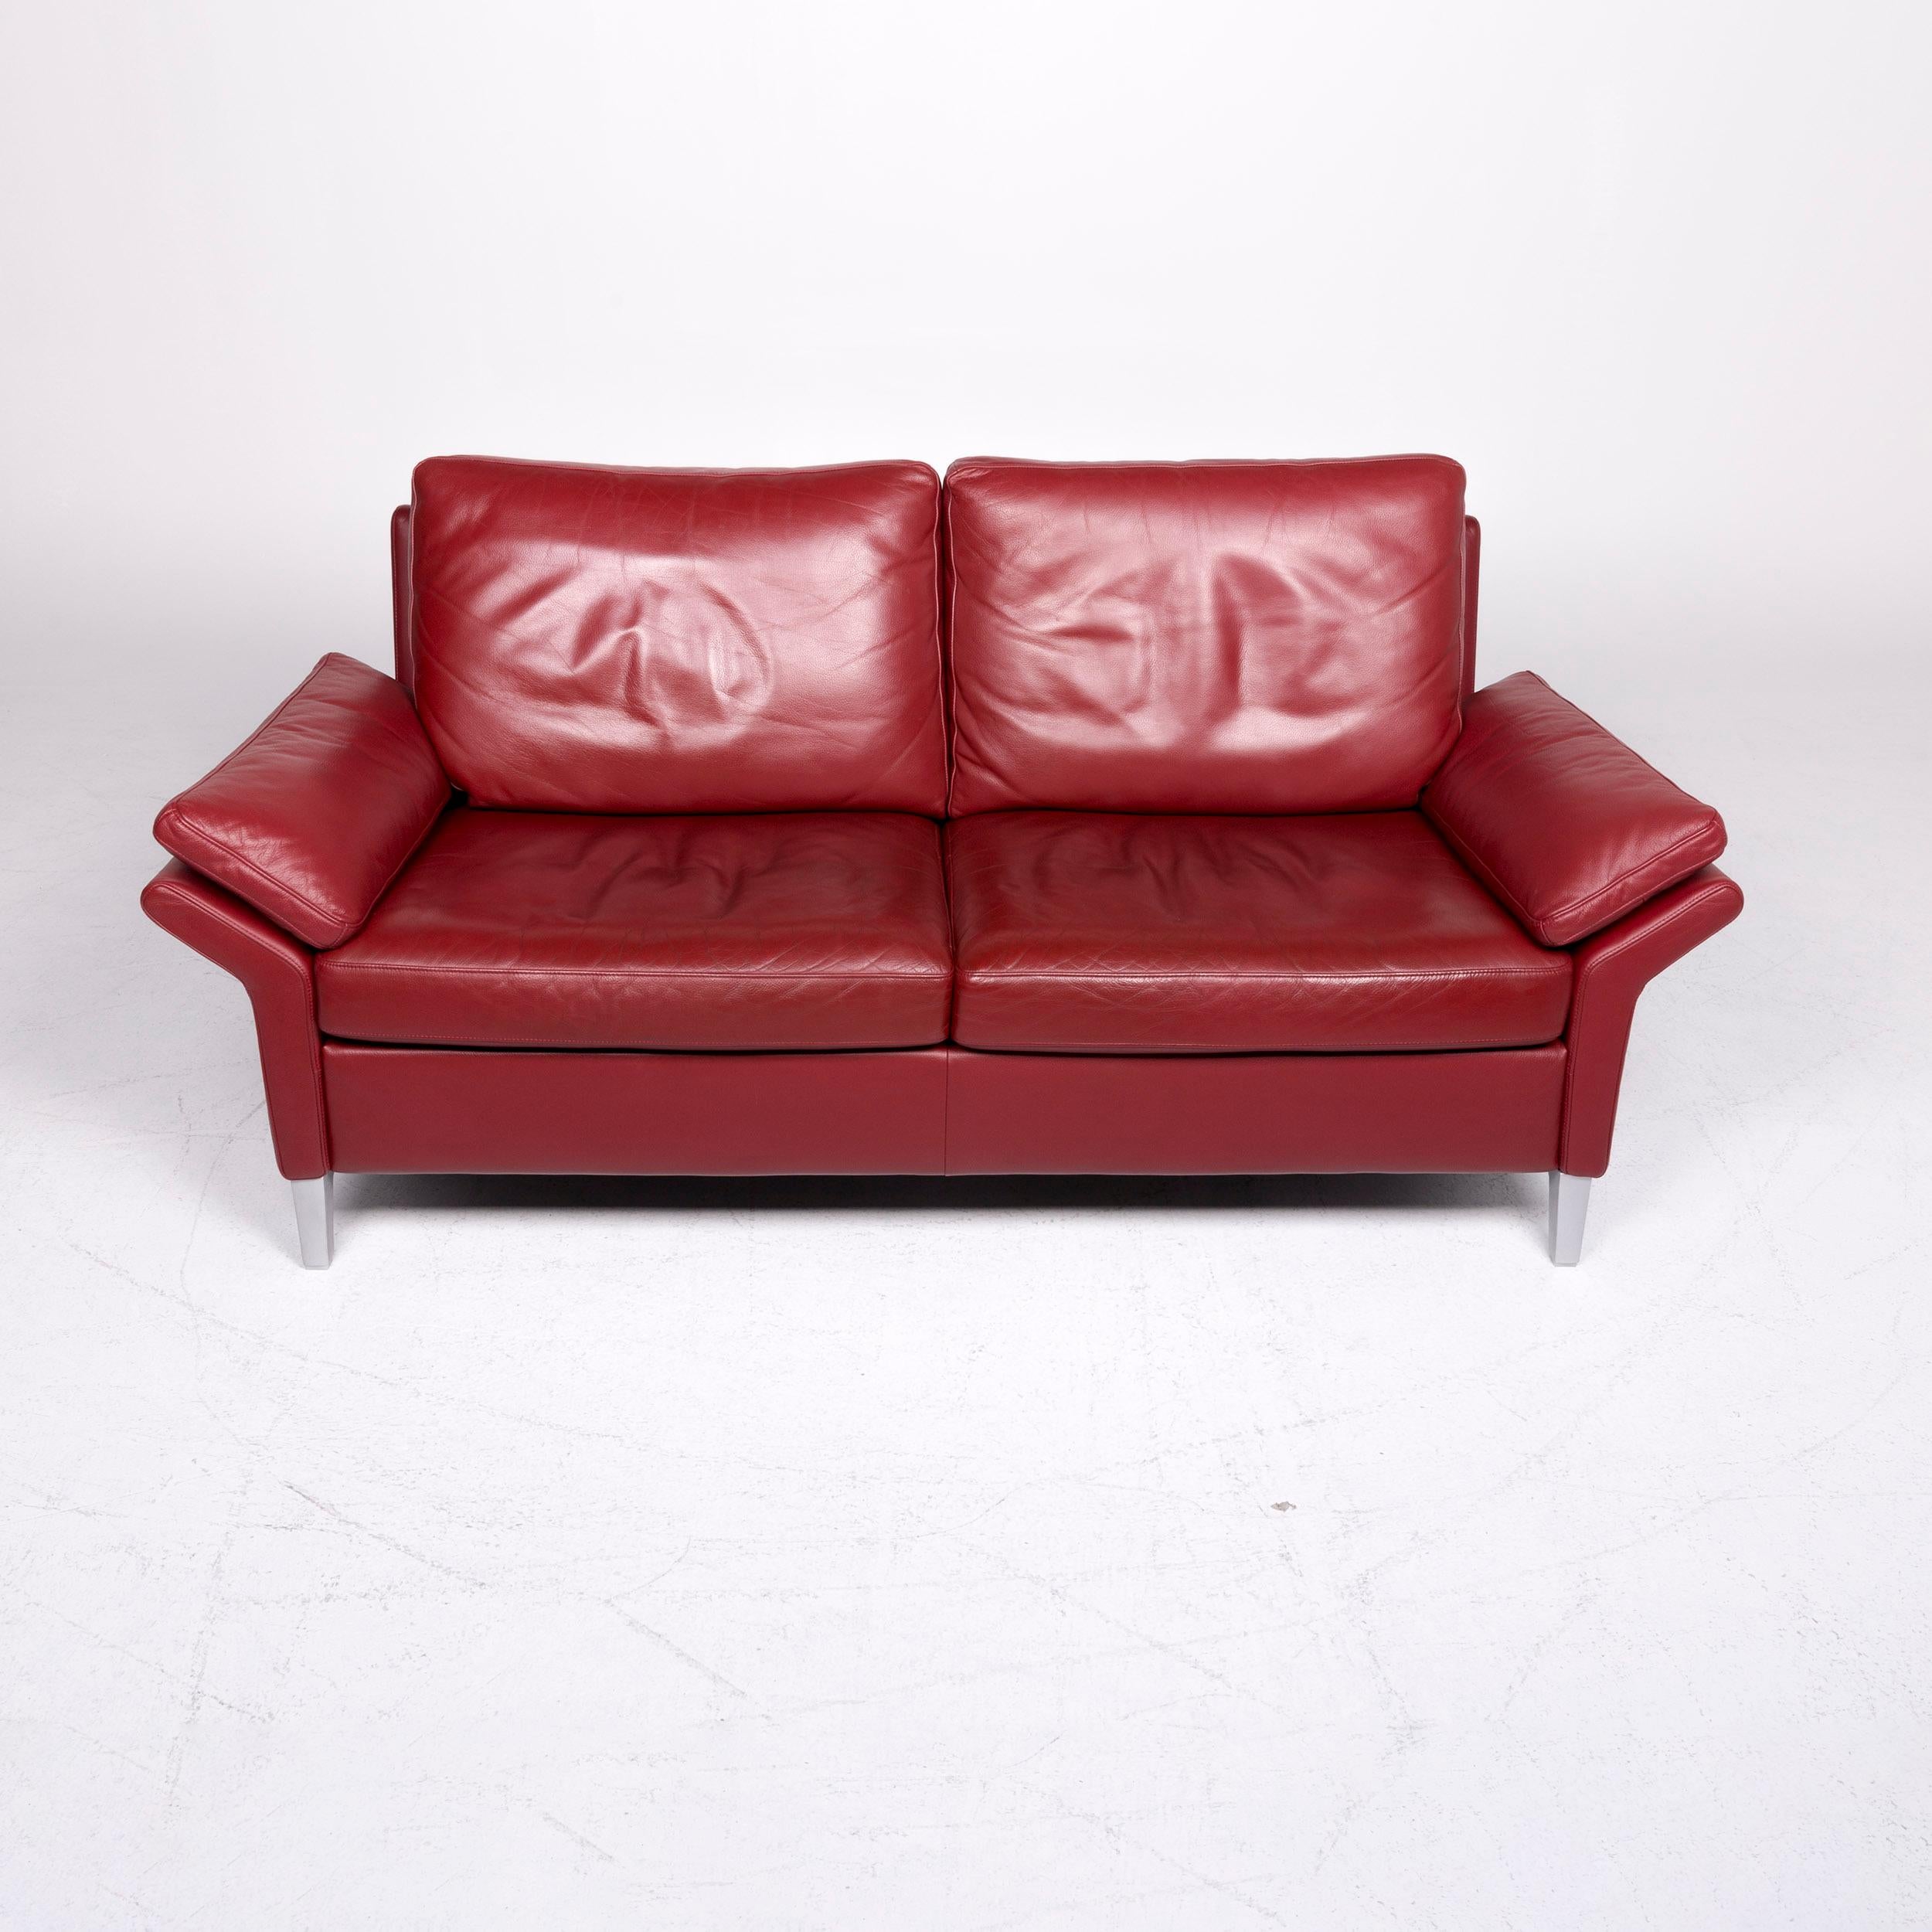 Contemporary Rolf Benz 3300 Designer Leather Sofa Red Genuine Leather Two-Seat Couch